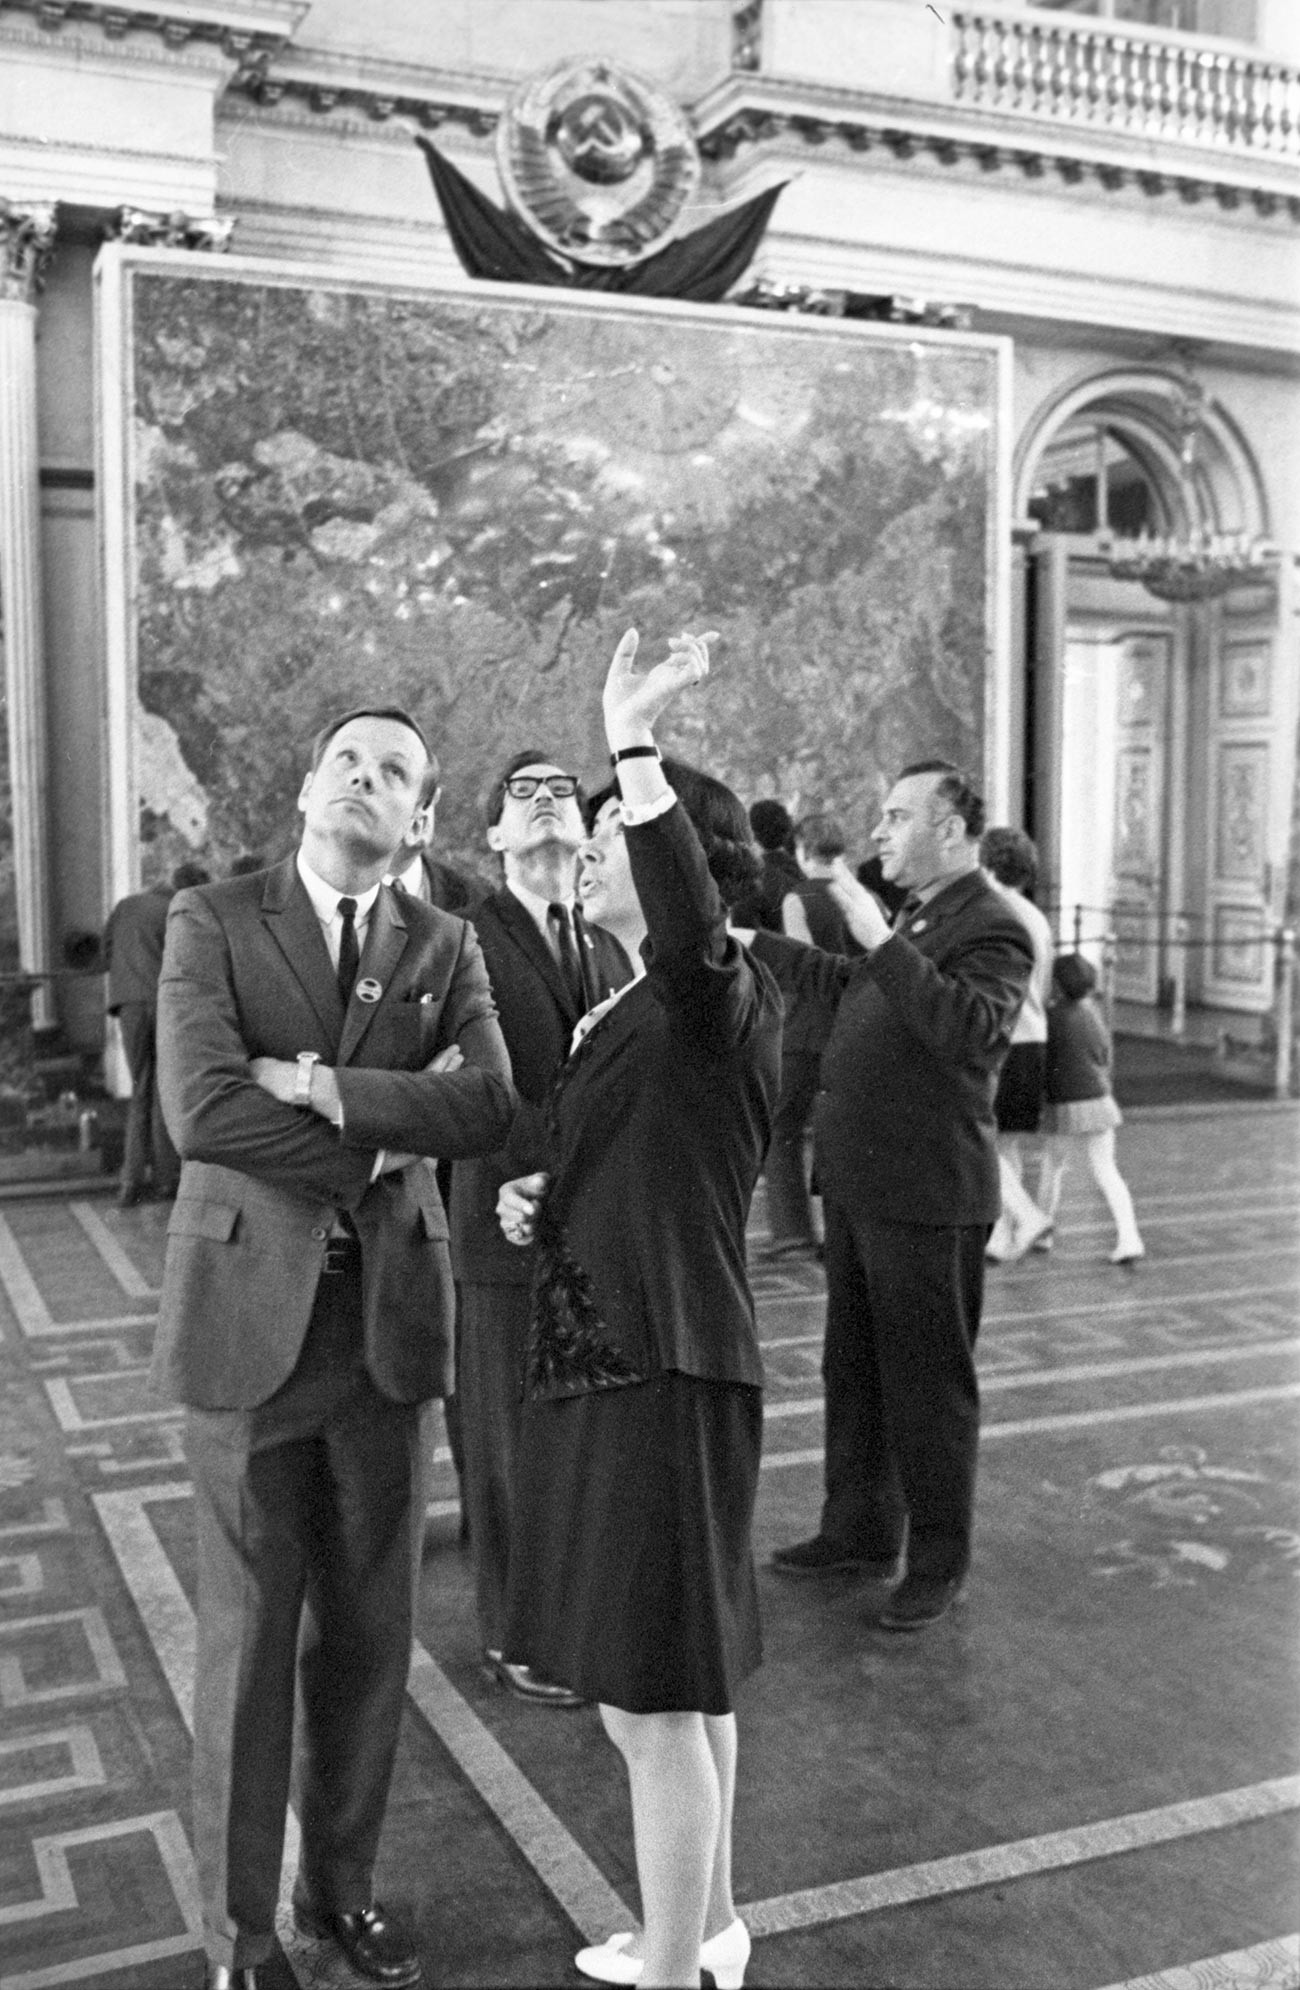 Neil Armstrong visiting the State Hermitage Museum.